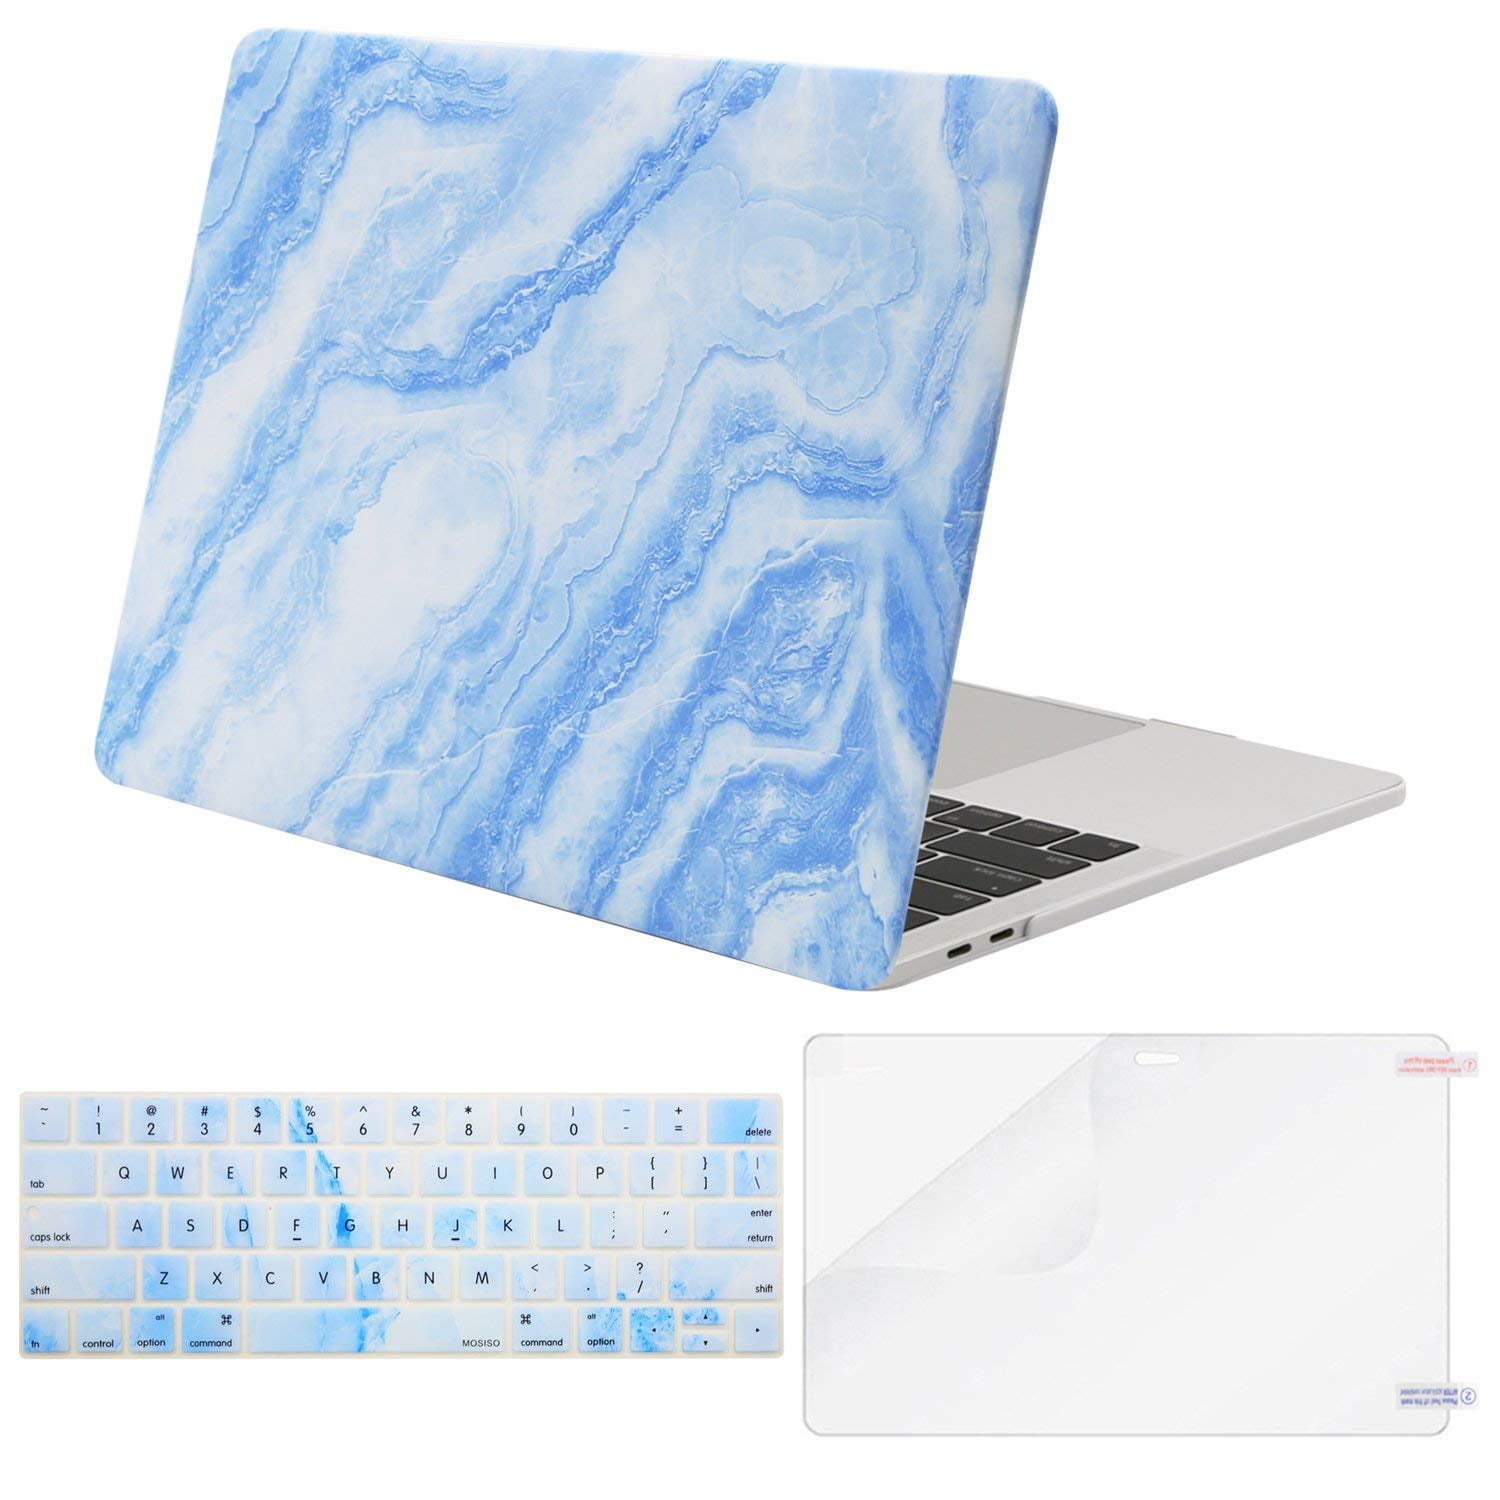 MOSISO MacBook Pro 13 Case 2019 2018 2017 2016 Release A1989 A1706 A1708 w/ & w/o Touch Bar,Plastic Pattern Hard Case&Keyboard Cover&Screen Protector Compatible Newest Mac Pro 13,Navy Blue Marble 